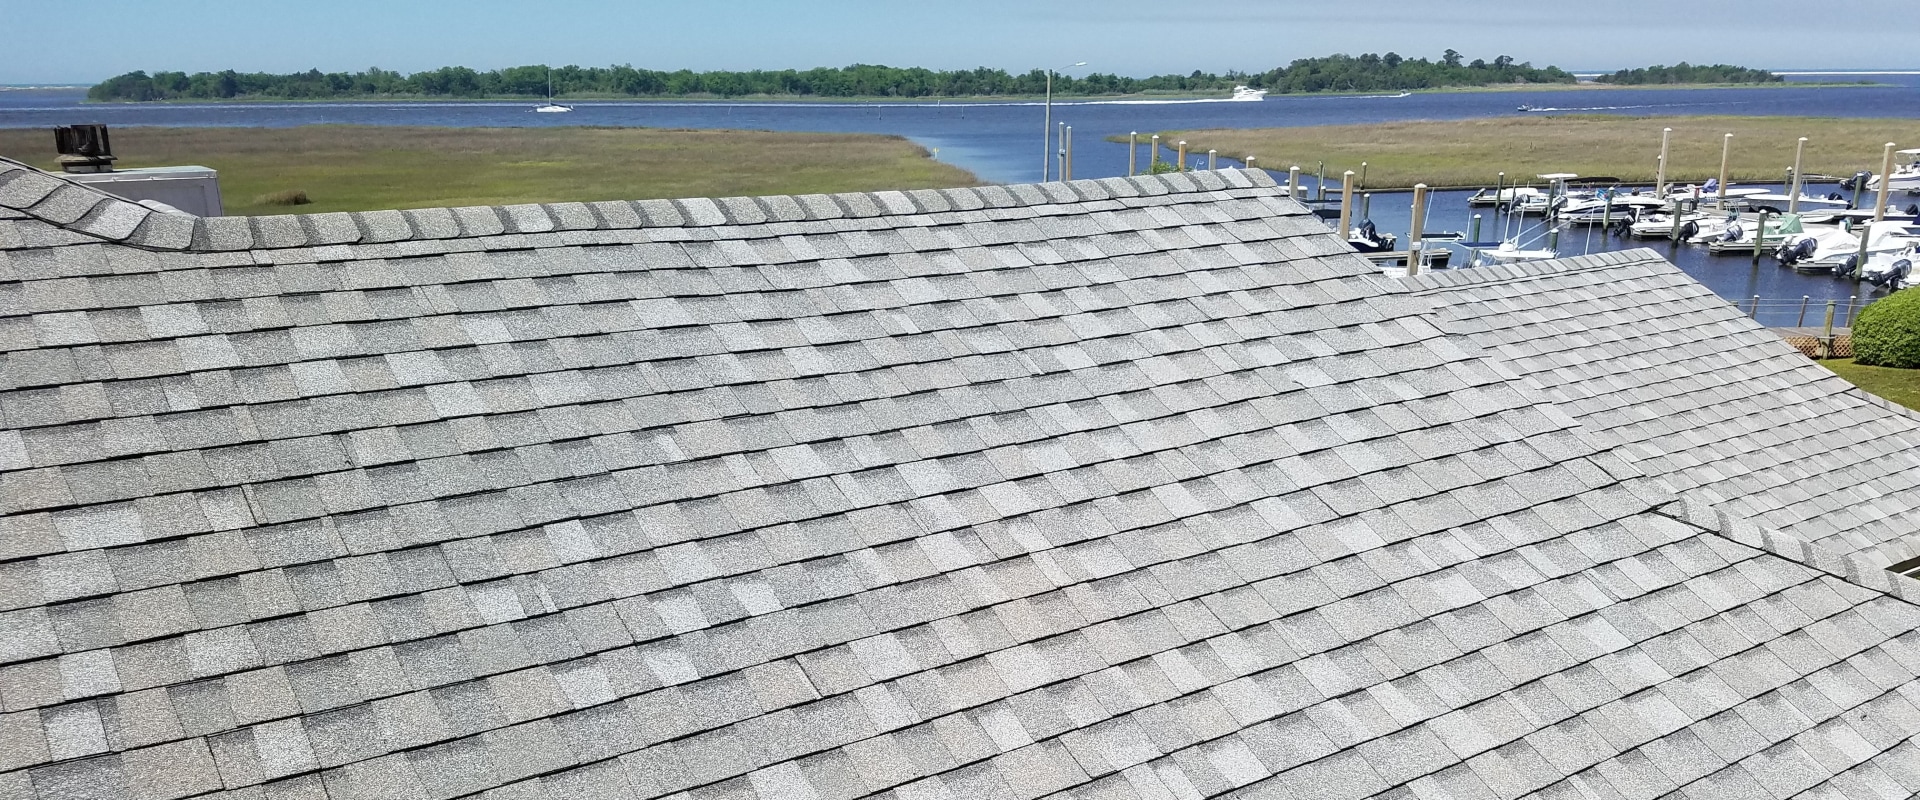 Finding the Best Roofing Companies in Wilmington NC